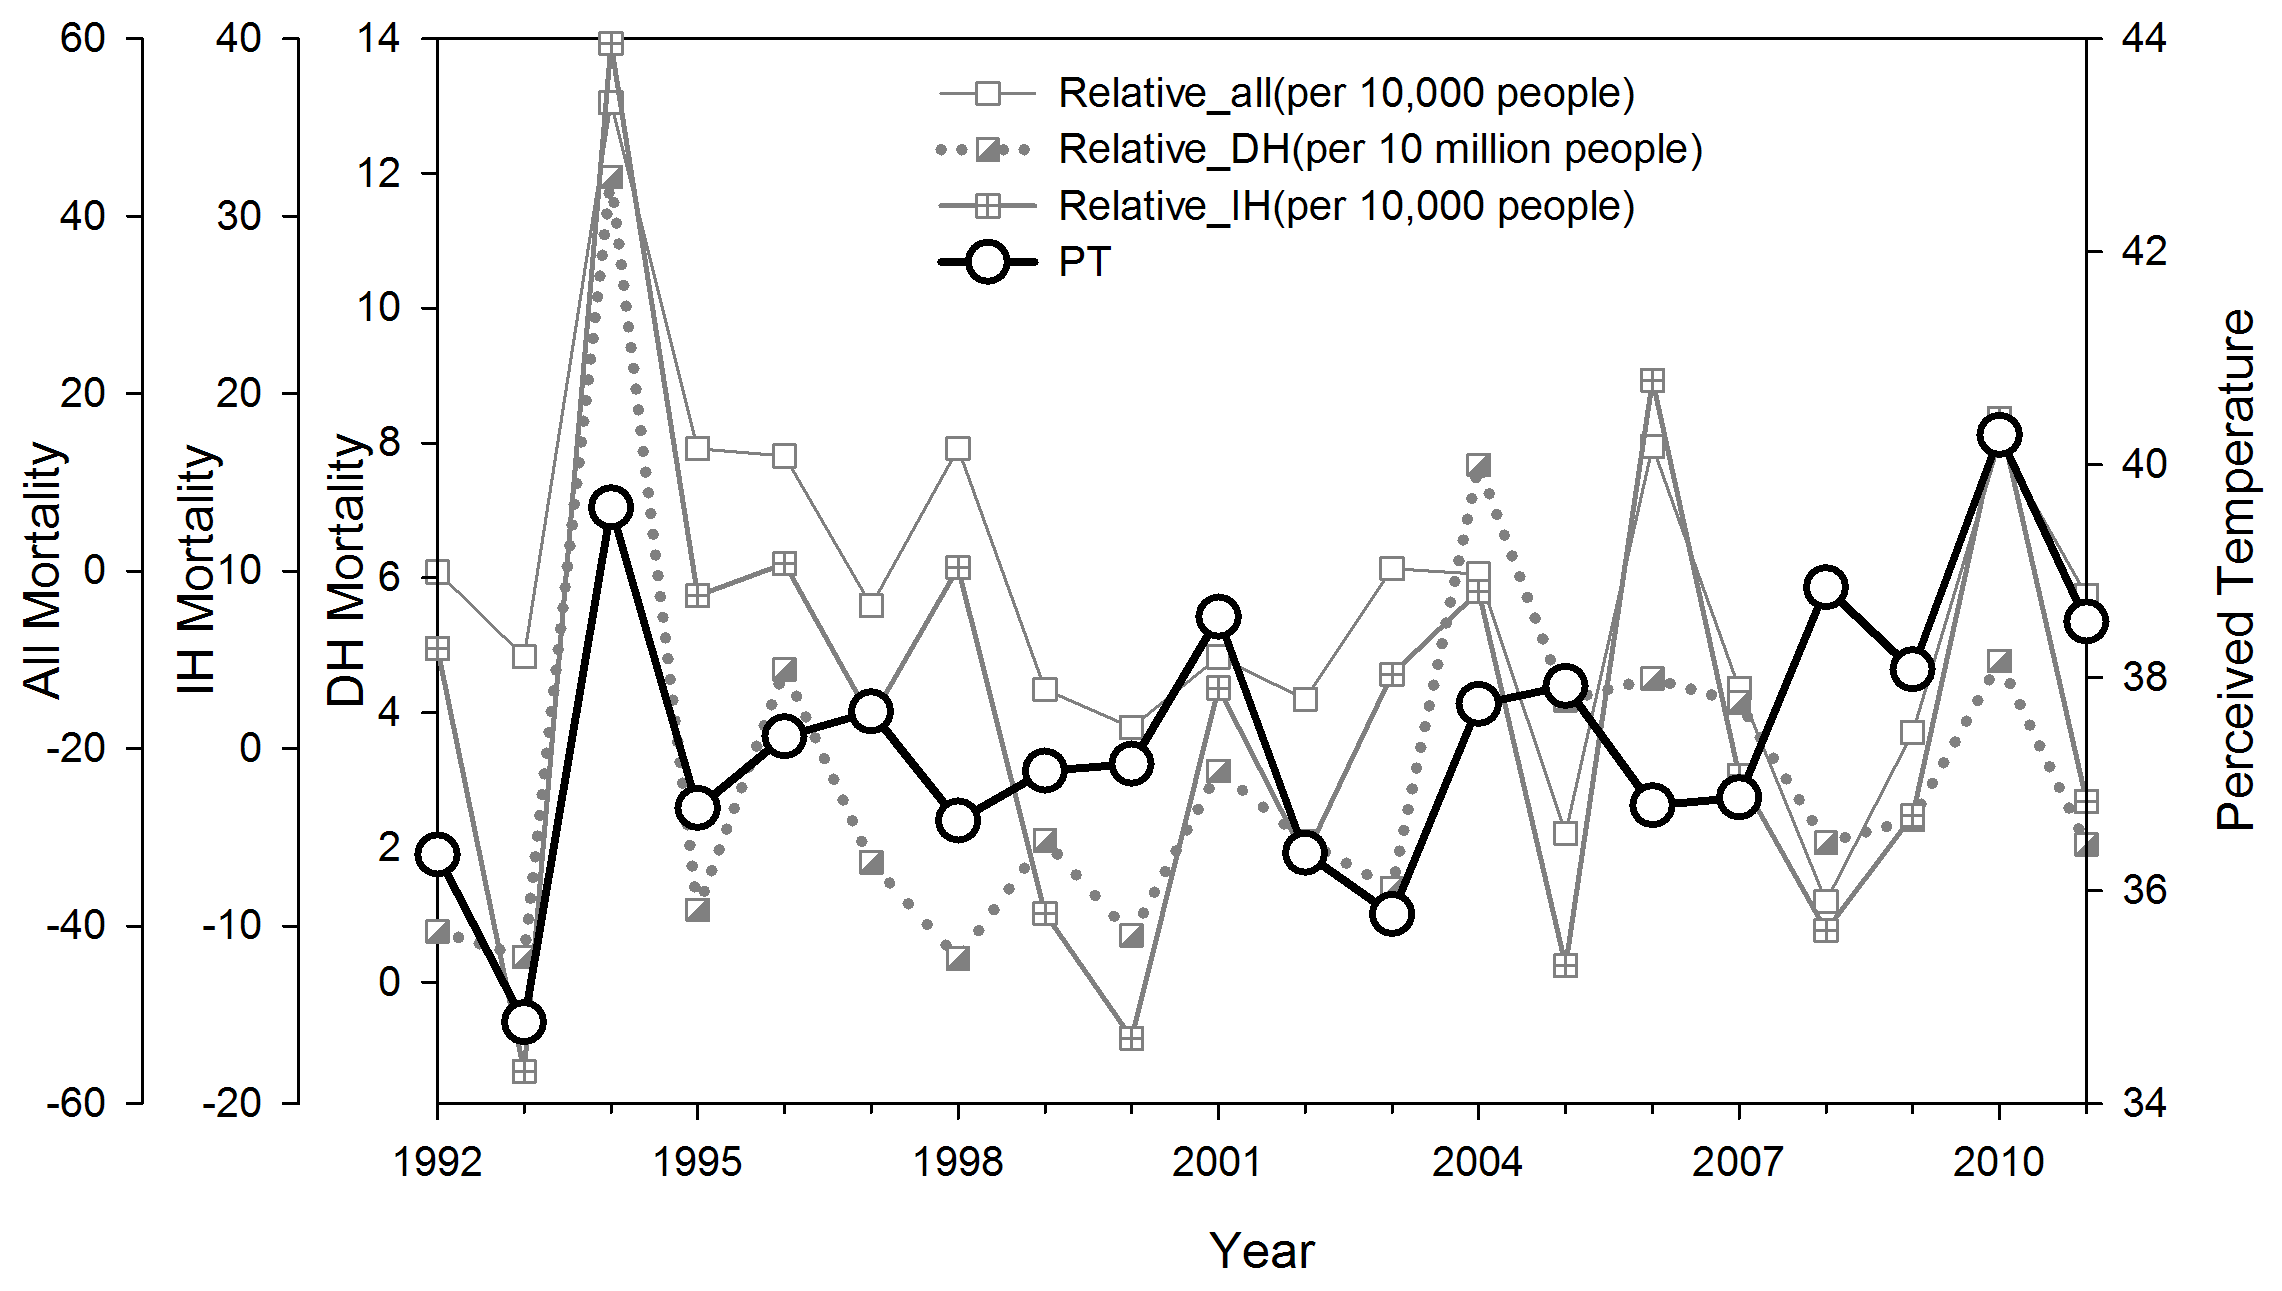 Fig. 3.3.8. Time-series of summer mean PT, mortality rate by DH and excess mortality rate by IH and all diseases from 1992 to 2011